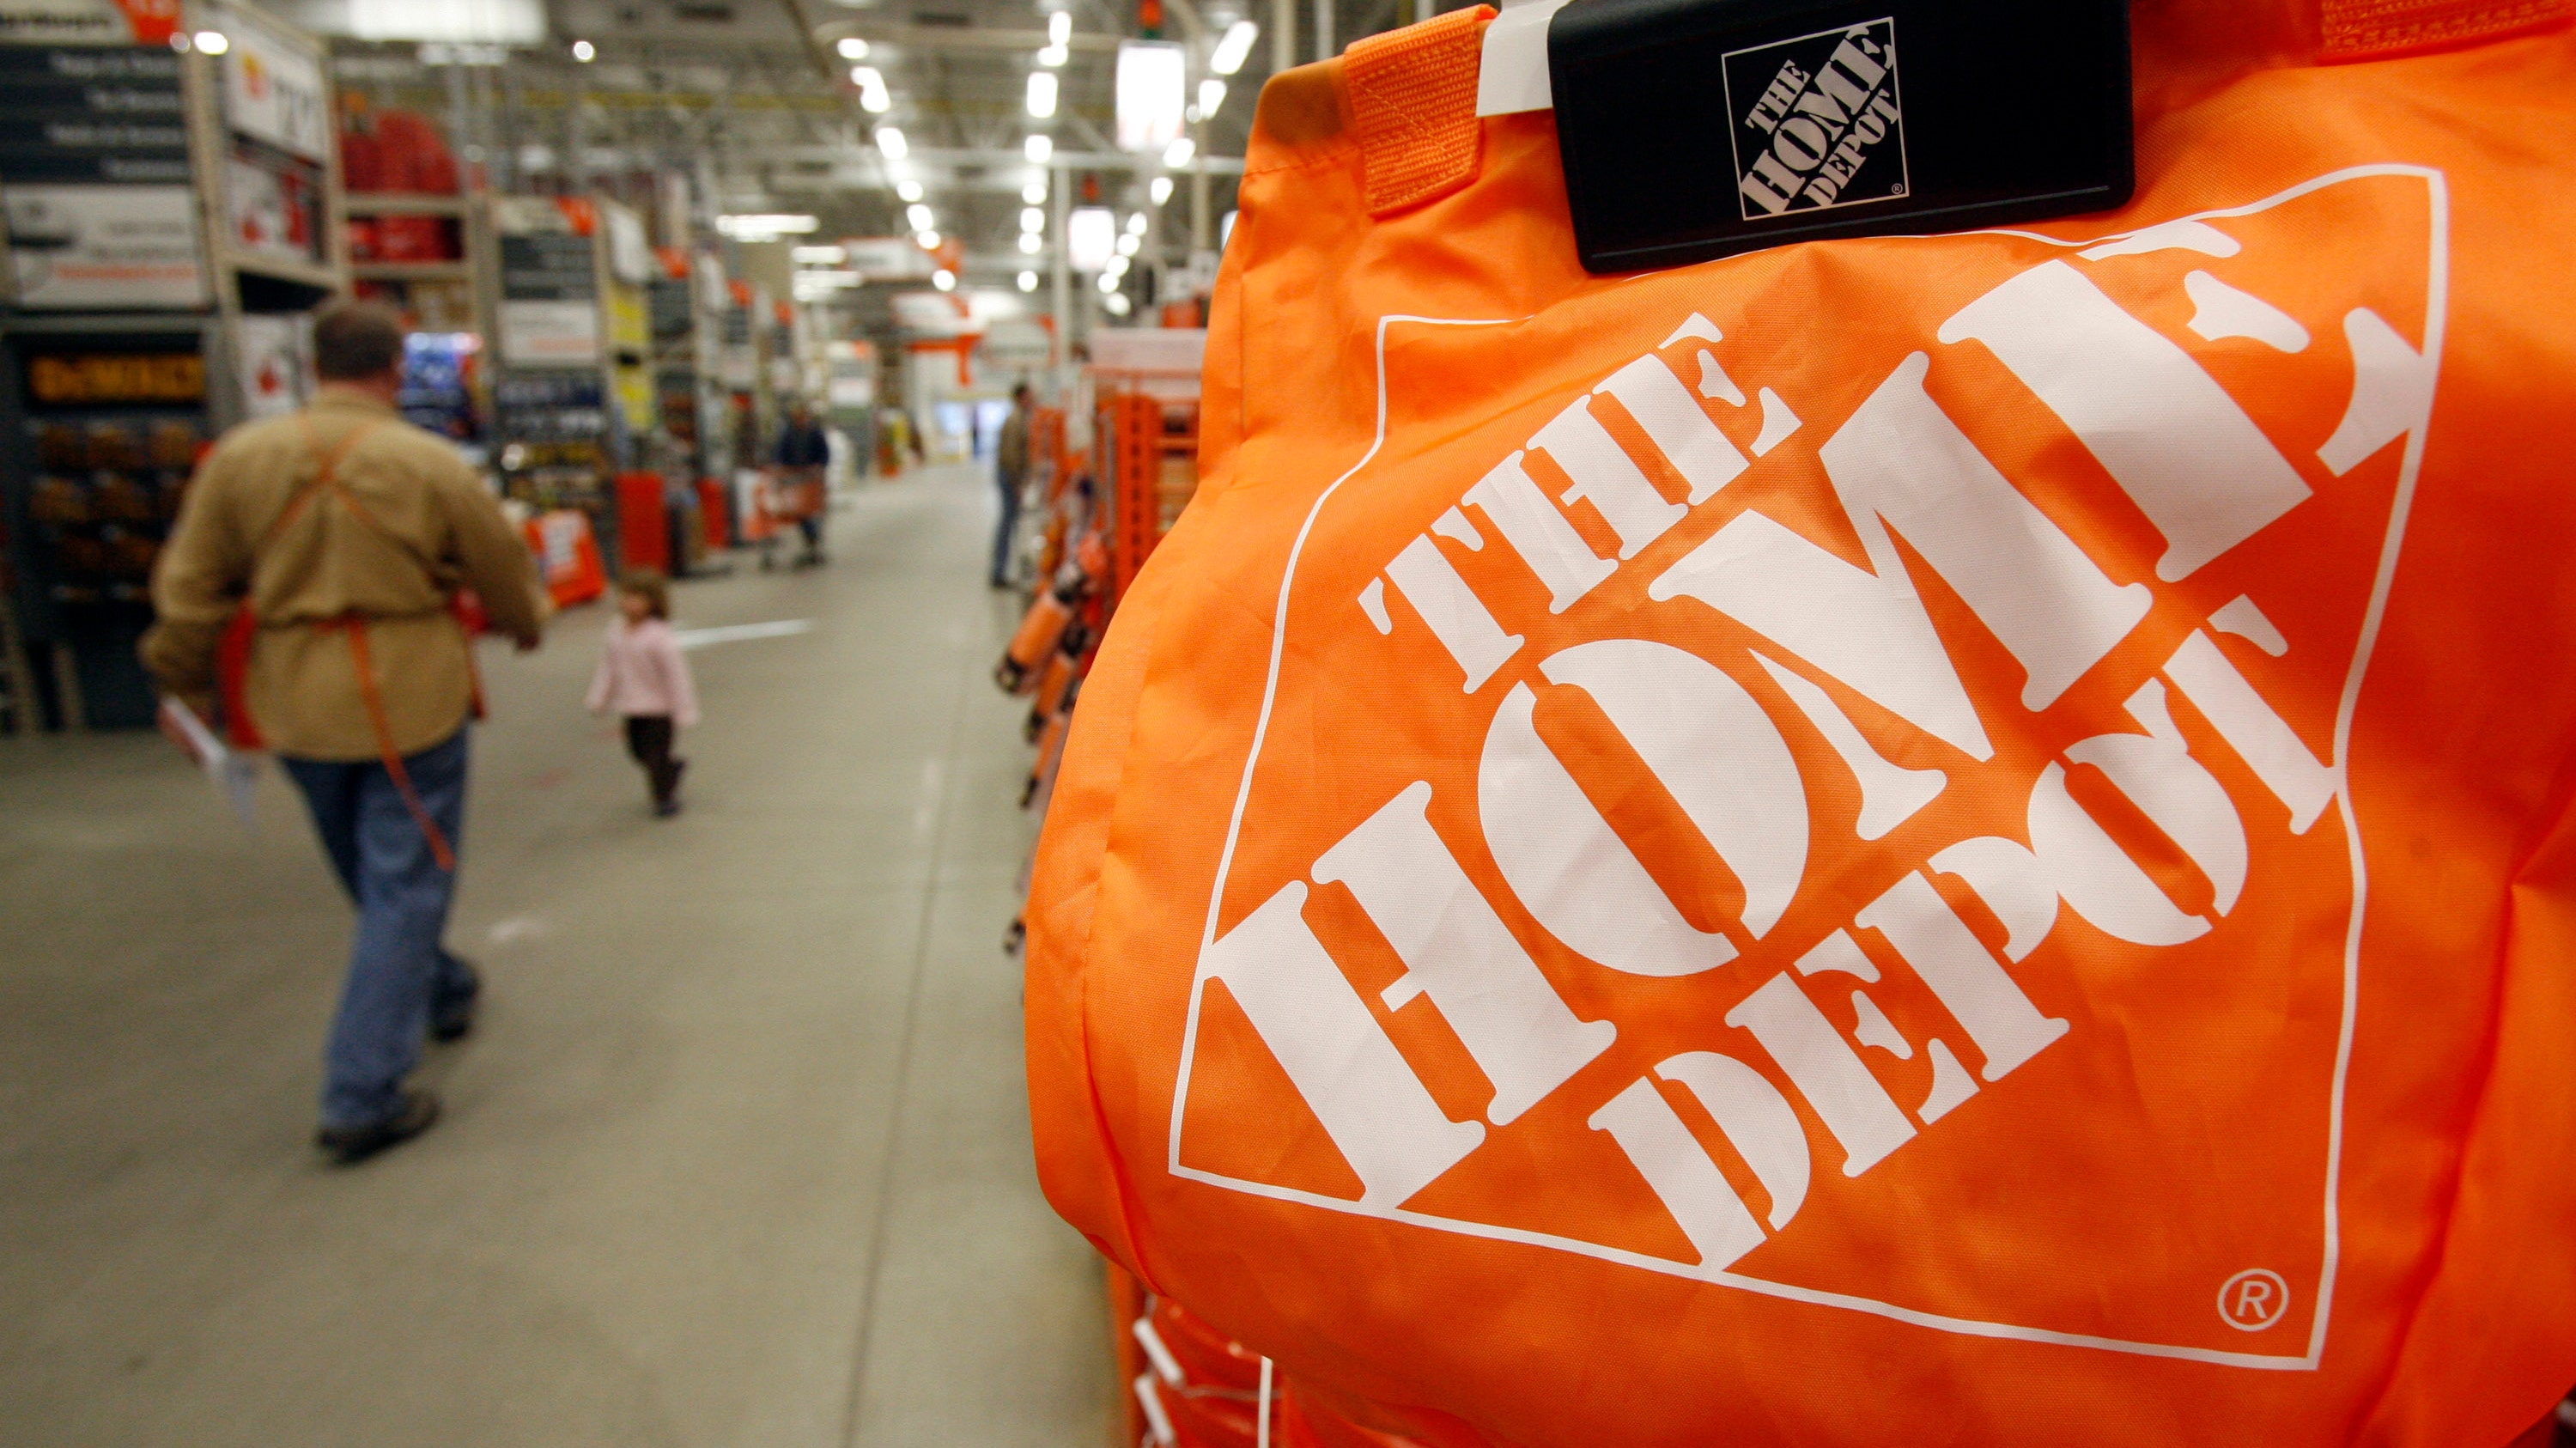 Data breach at Home Depot affected 56 million debit and credit cards